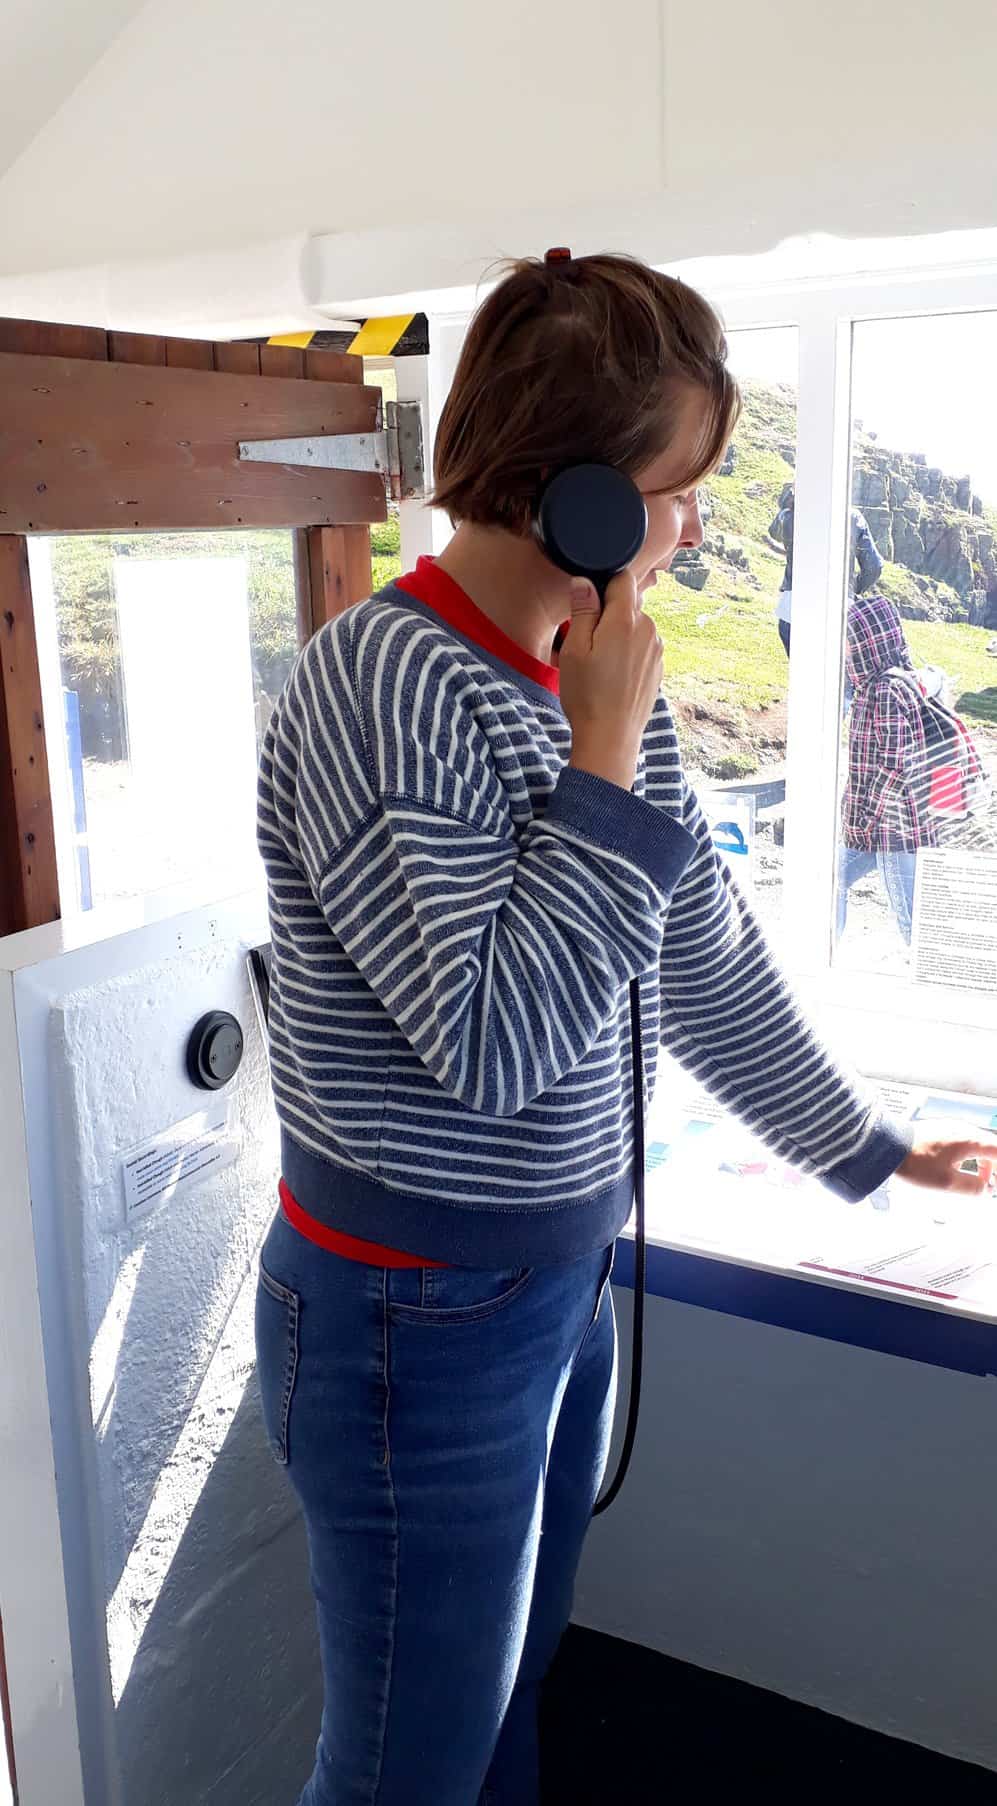 Heavy Duty Handset being used in National Trust Wildlife Watchpoint Hut